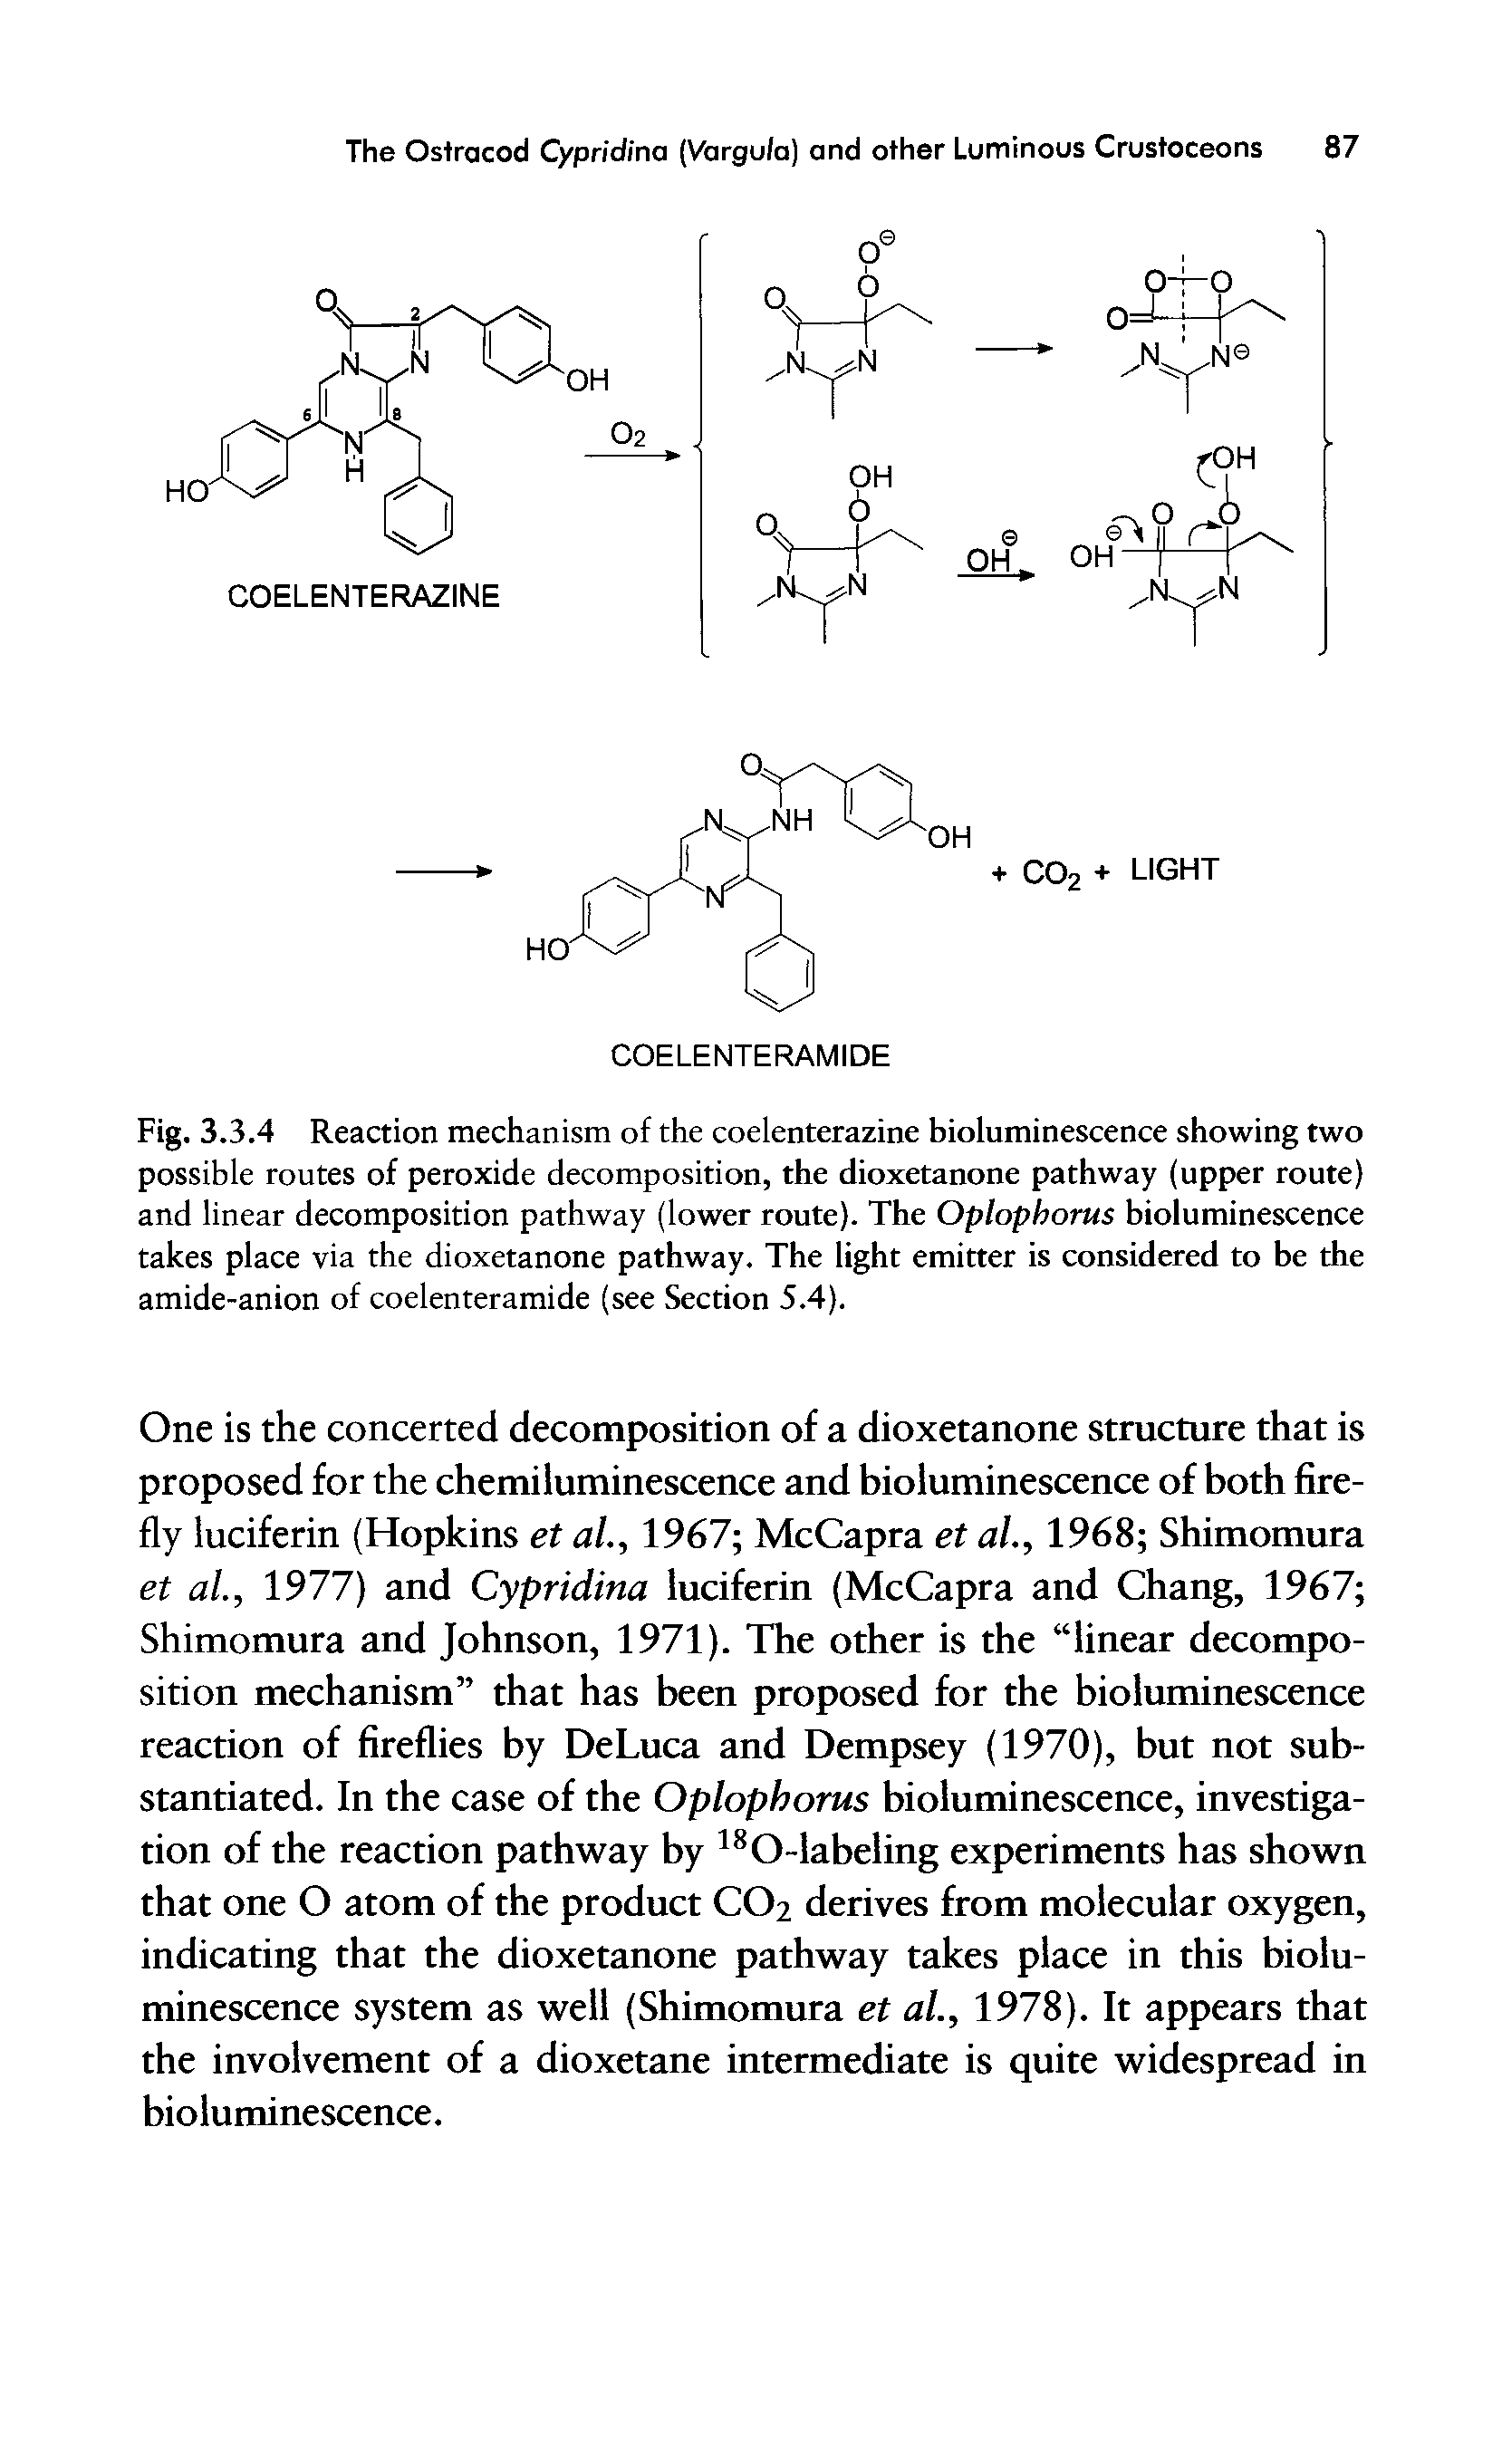 Fig. 3.3.4 Reaction mechanism of the coelenterazine bioluminescence showing two possible routes of peroxide decomposition, the dioxetanone pathway (upper route) and linear decomposition pathway (lower route). The Oplopborus bioluminescence takes place via the dioxetanone pathway. The light emitter is considered to be the amide-anion of coelenteramide (see Section 5.4).